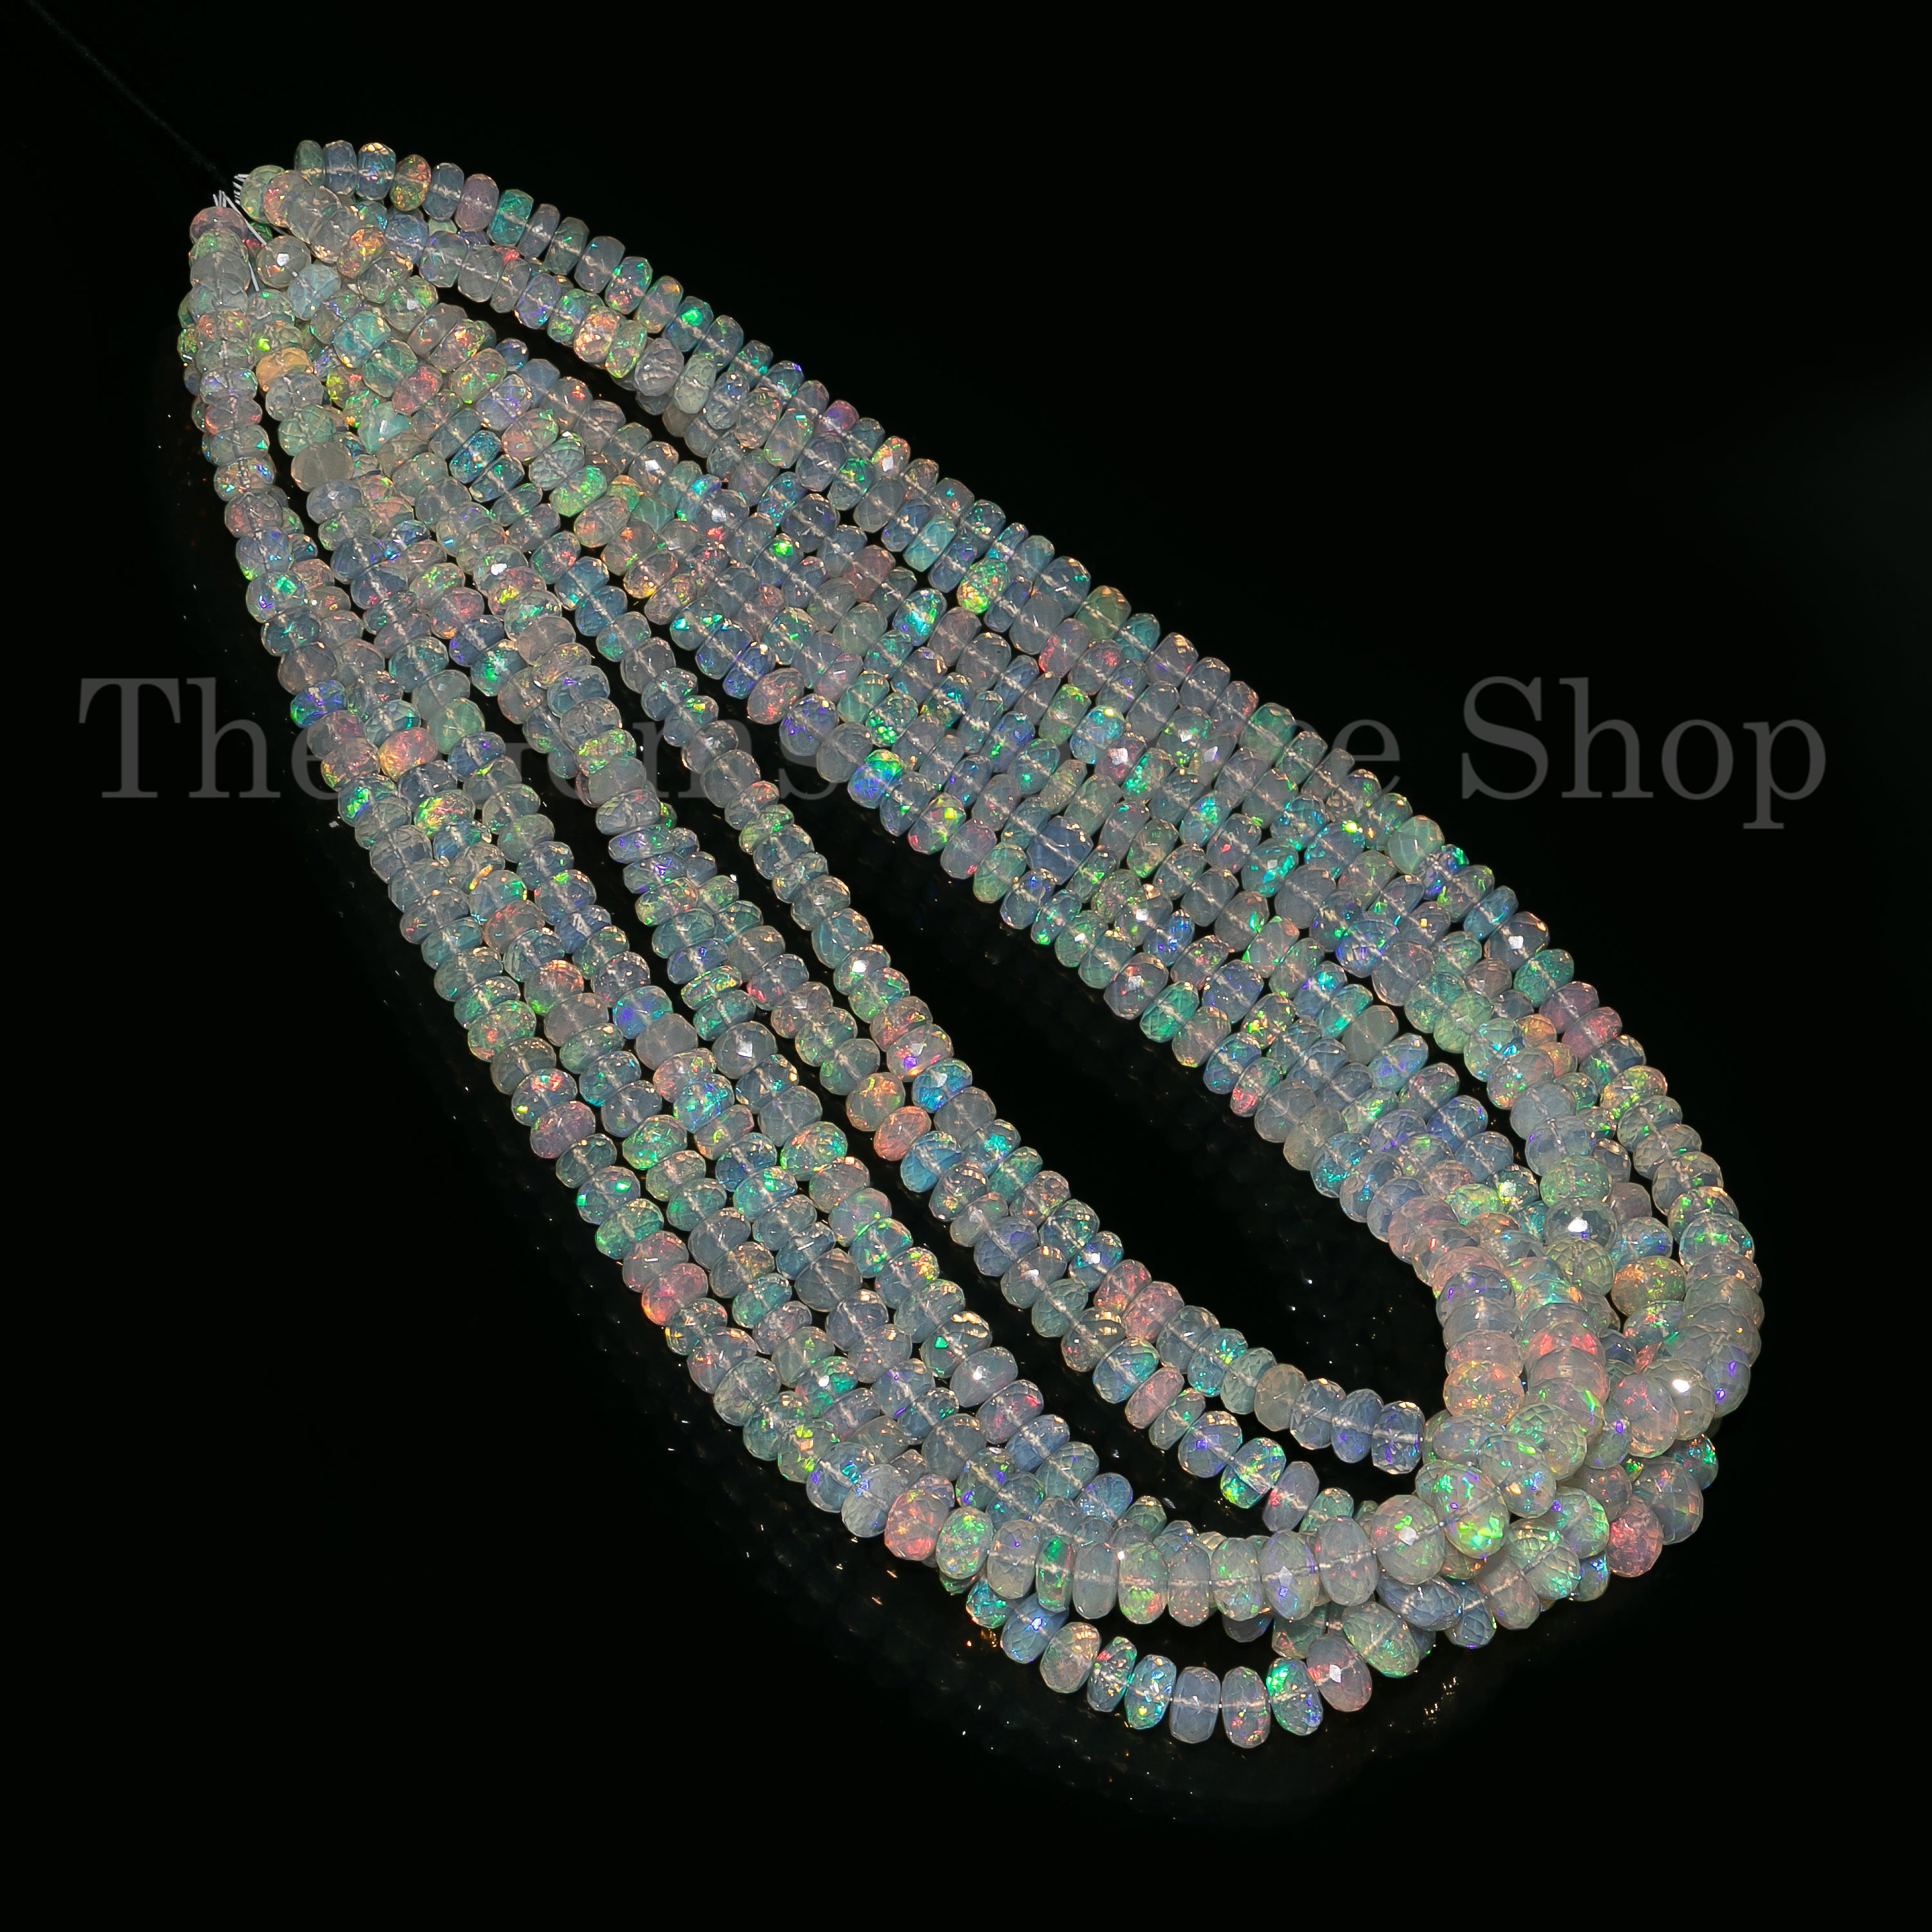 5-8 mm Ethiopian Opal Beads, Opal Faceted Beads, Opal Rondelle Beads, Opal Faceted Rondelle Beads, Opal Gemstone Beads